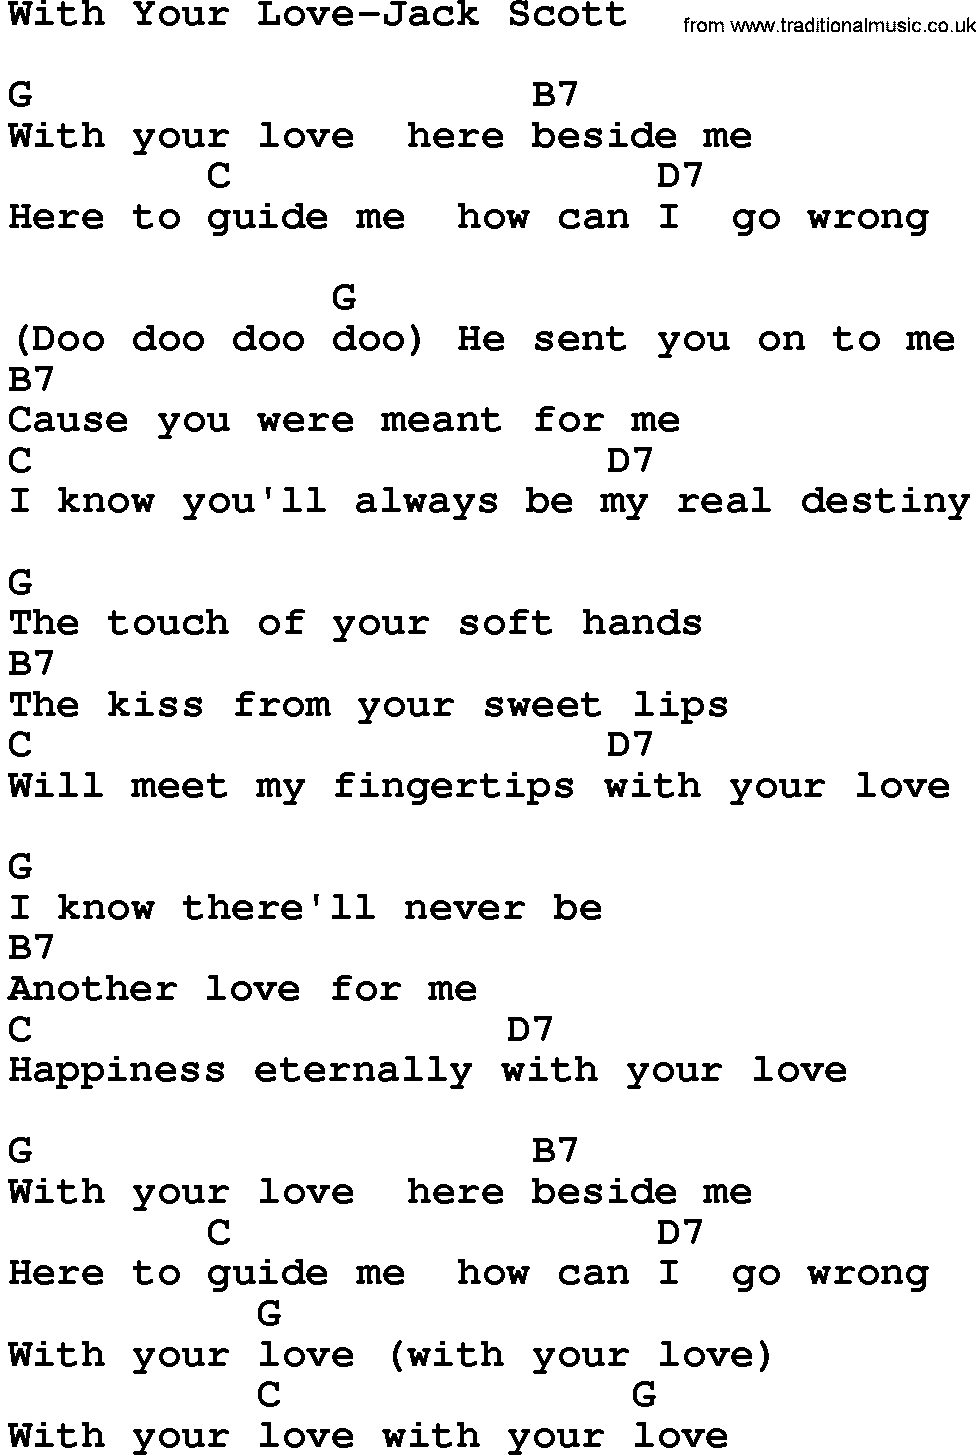 Country music song: With Your Love-Jack Scott lyrics and chords